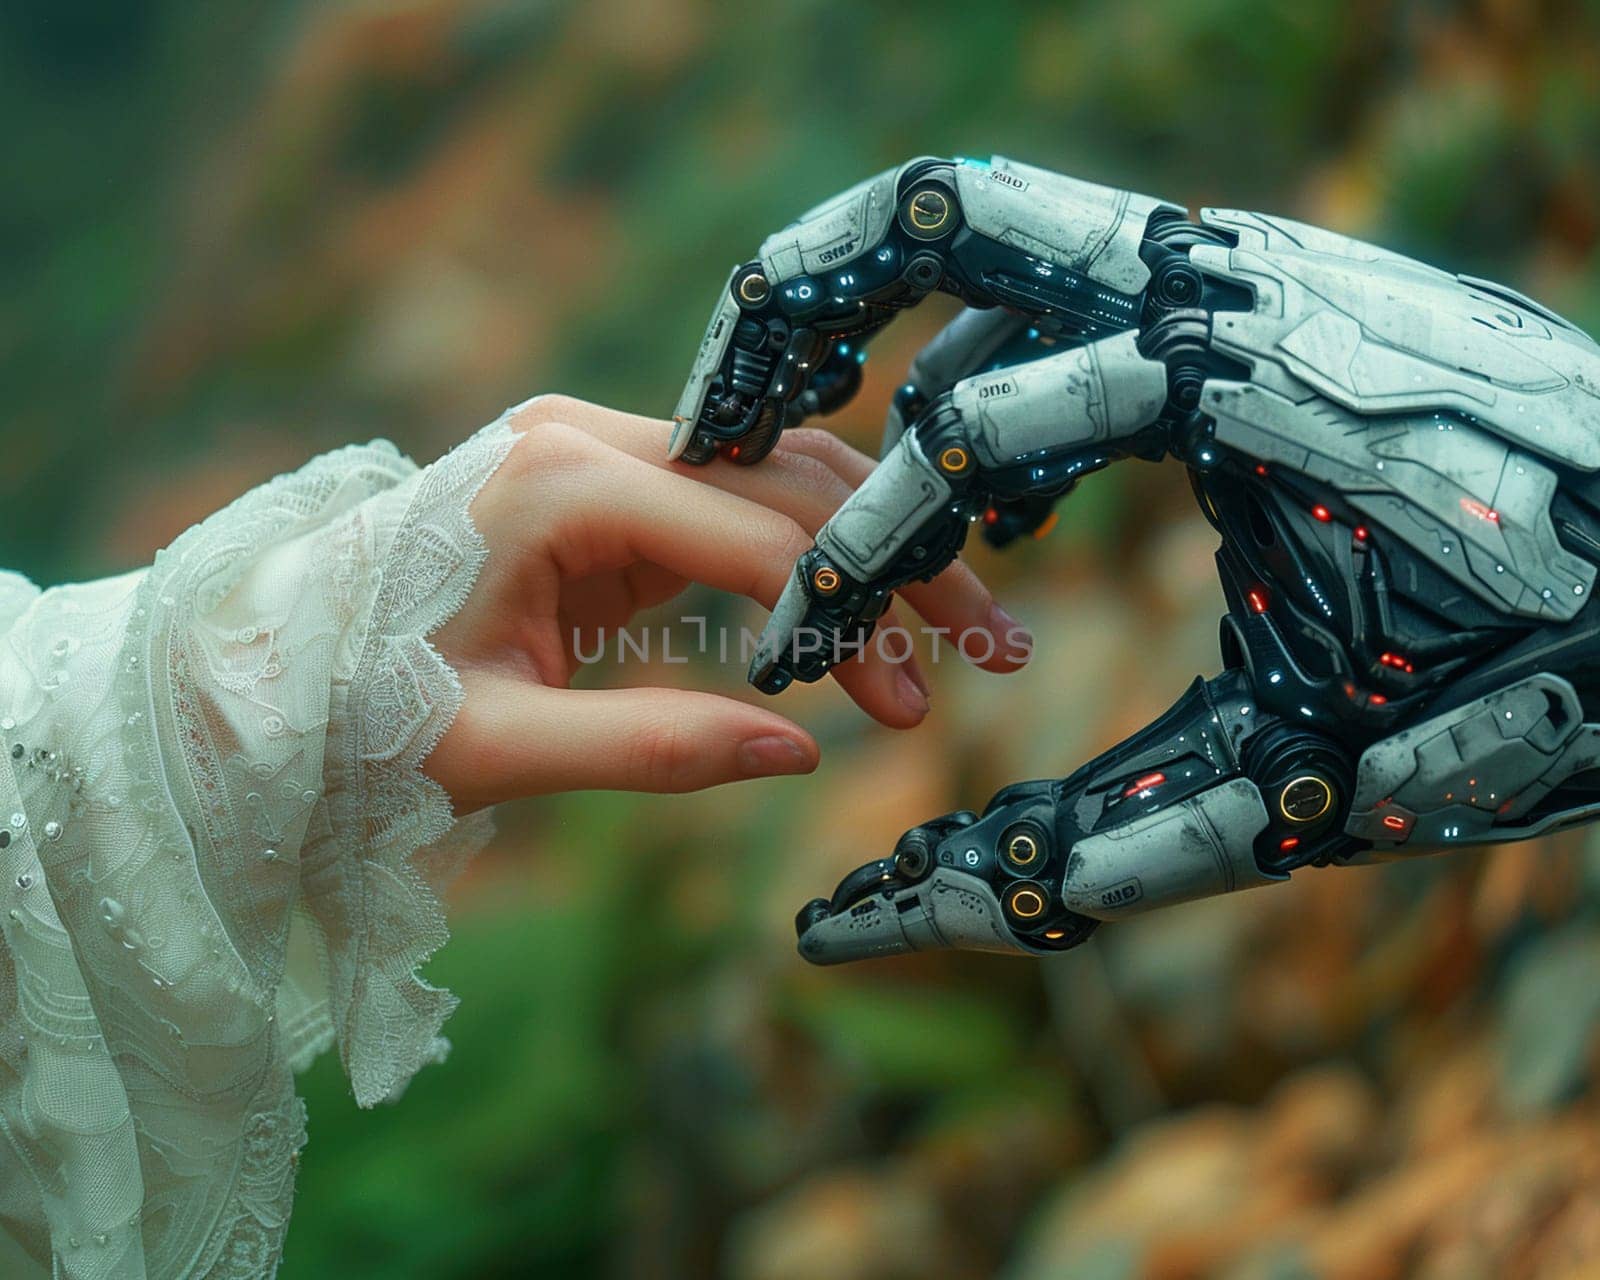 Gentle touch between human and android, a moment of connection in a tech-woven world.